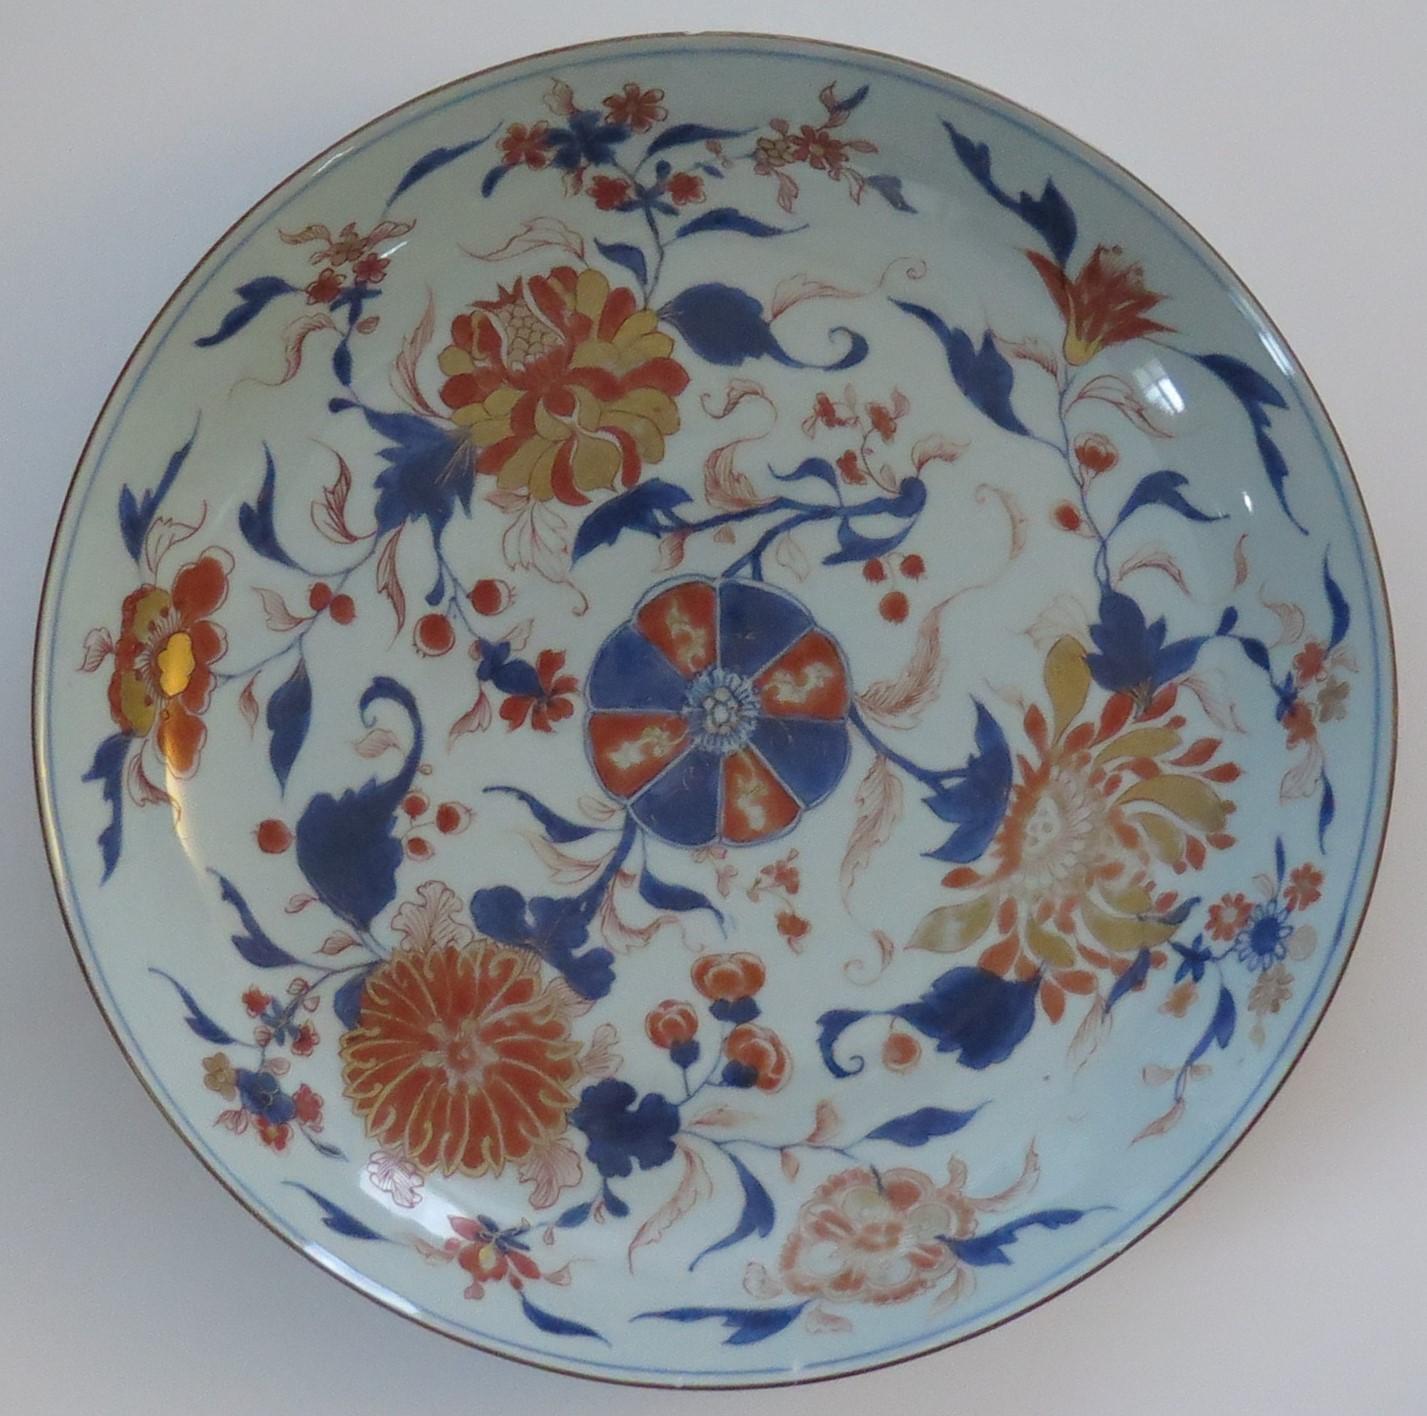 This is a very beautifully hand painted Chinese Imari porcelain very large Dish or Plate / Platter from the Qing, Kangxi period, 1662-1722, dating to Circa 1710.

Very large diameter ( 14.7 inches or 37.3cm) Kangxi period Plates or Chargers are hard